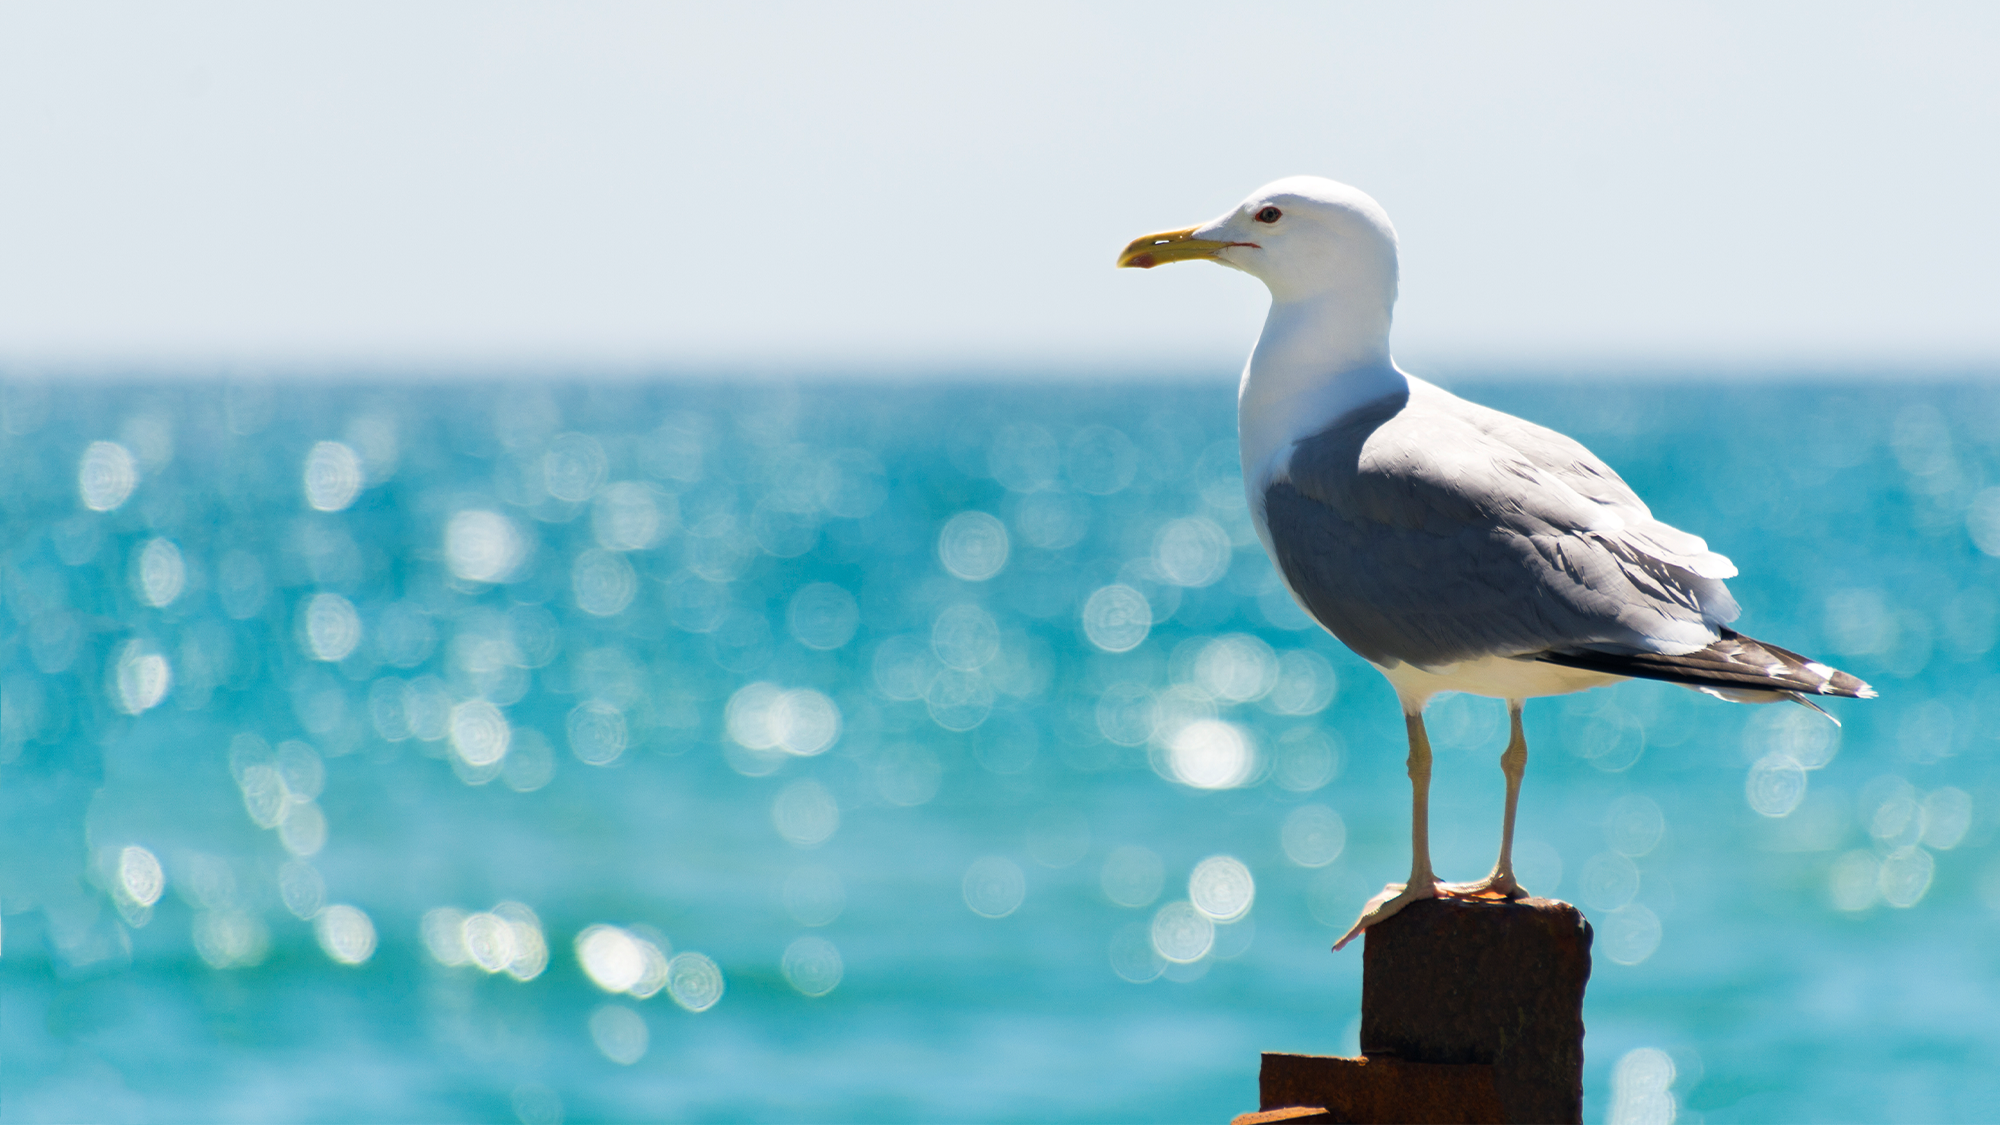 Bigger-brained gull species thrive in urban spaces